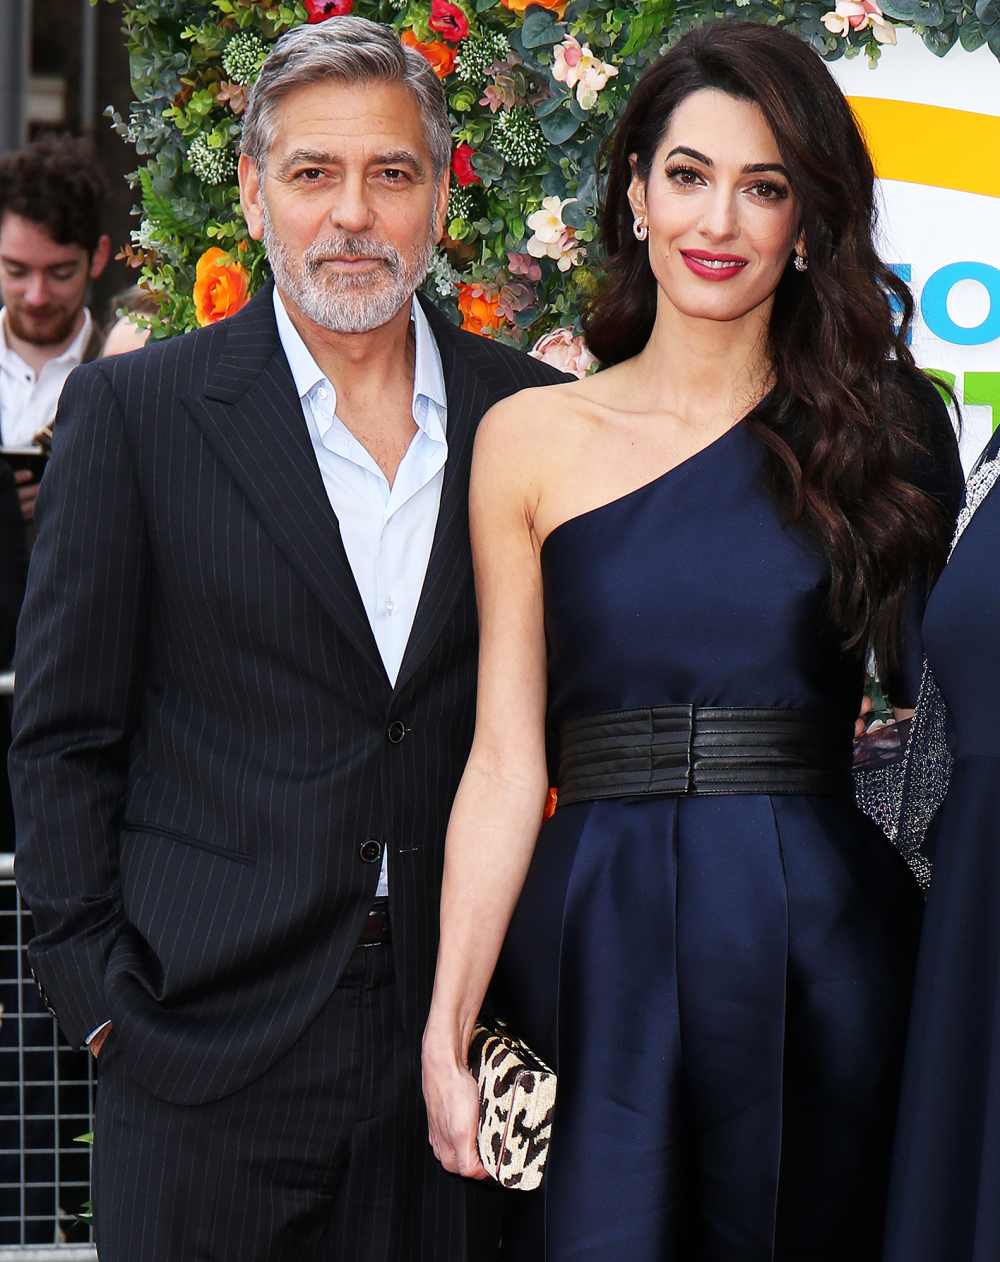 George Clooney’s Wife Amal Clooney Doesn’t Like His ER Character